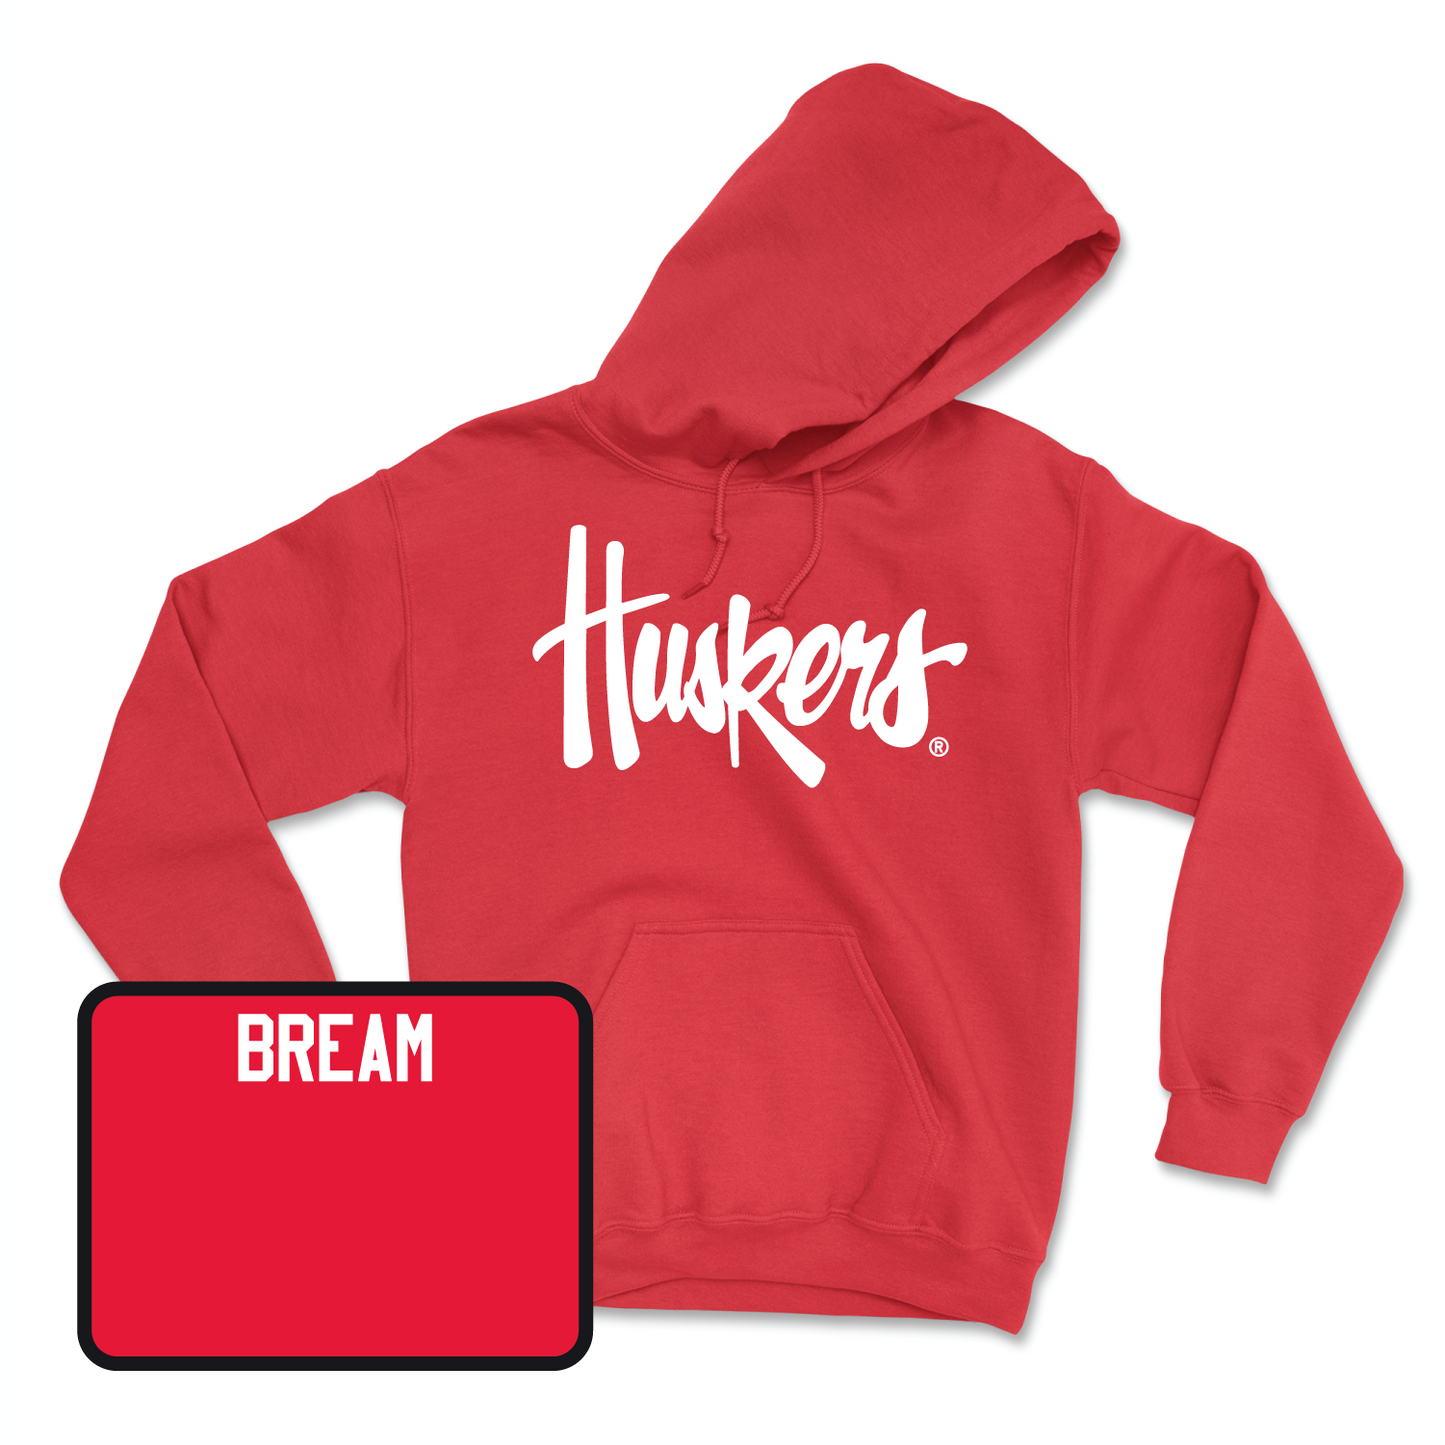 Red Women's Golf Huskers Hoodie Youth Large / Brooke Bream